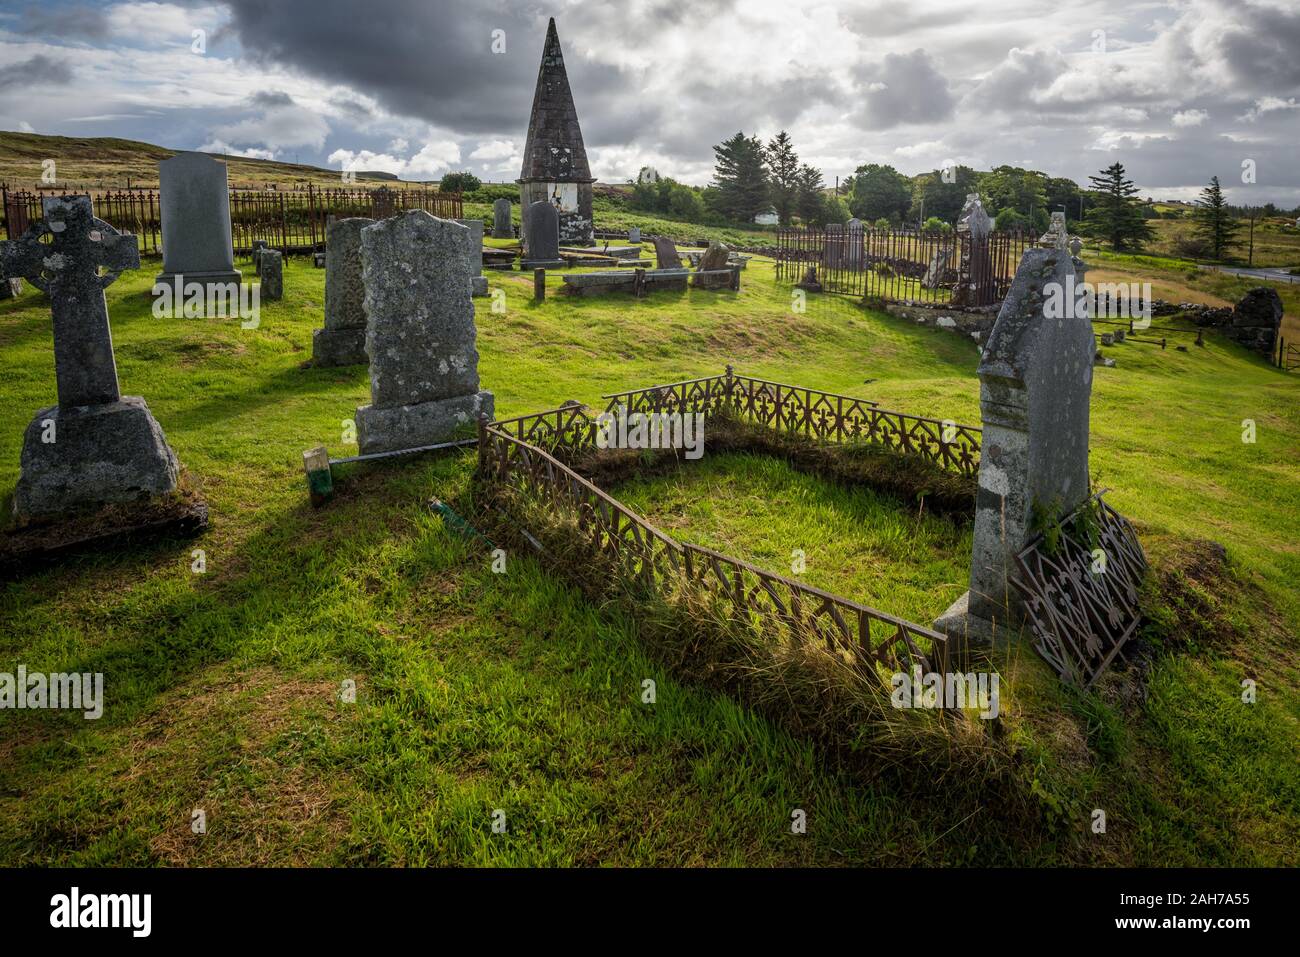 An ancient and abandoned scottish cemetery under a cloudy sky in the late afternoon light Stock Photo